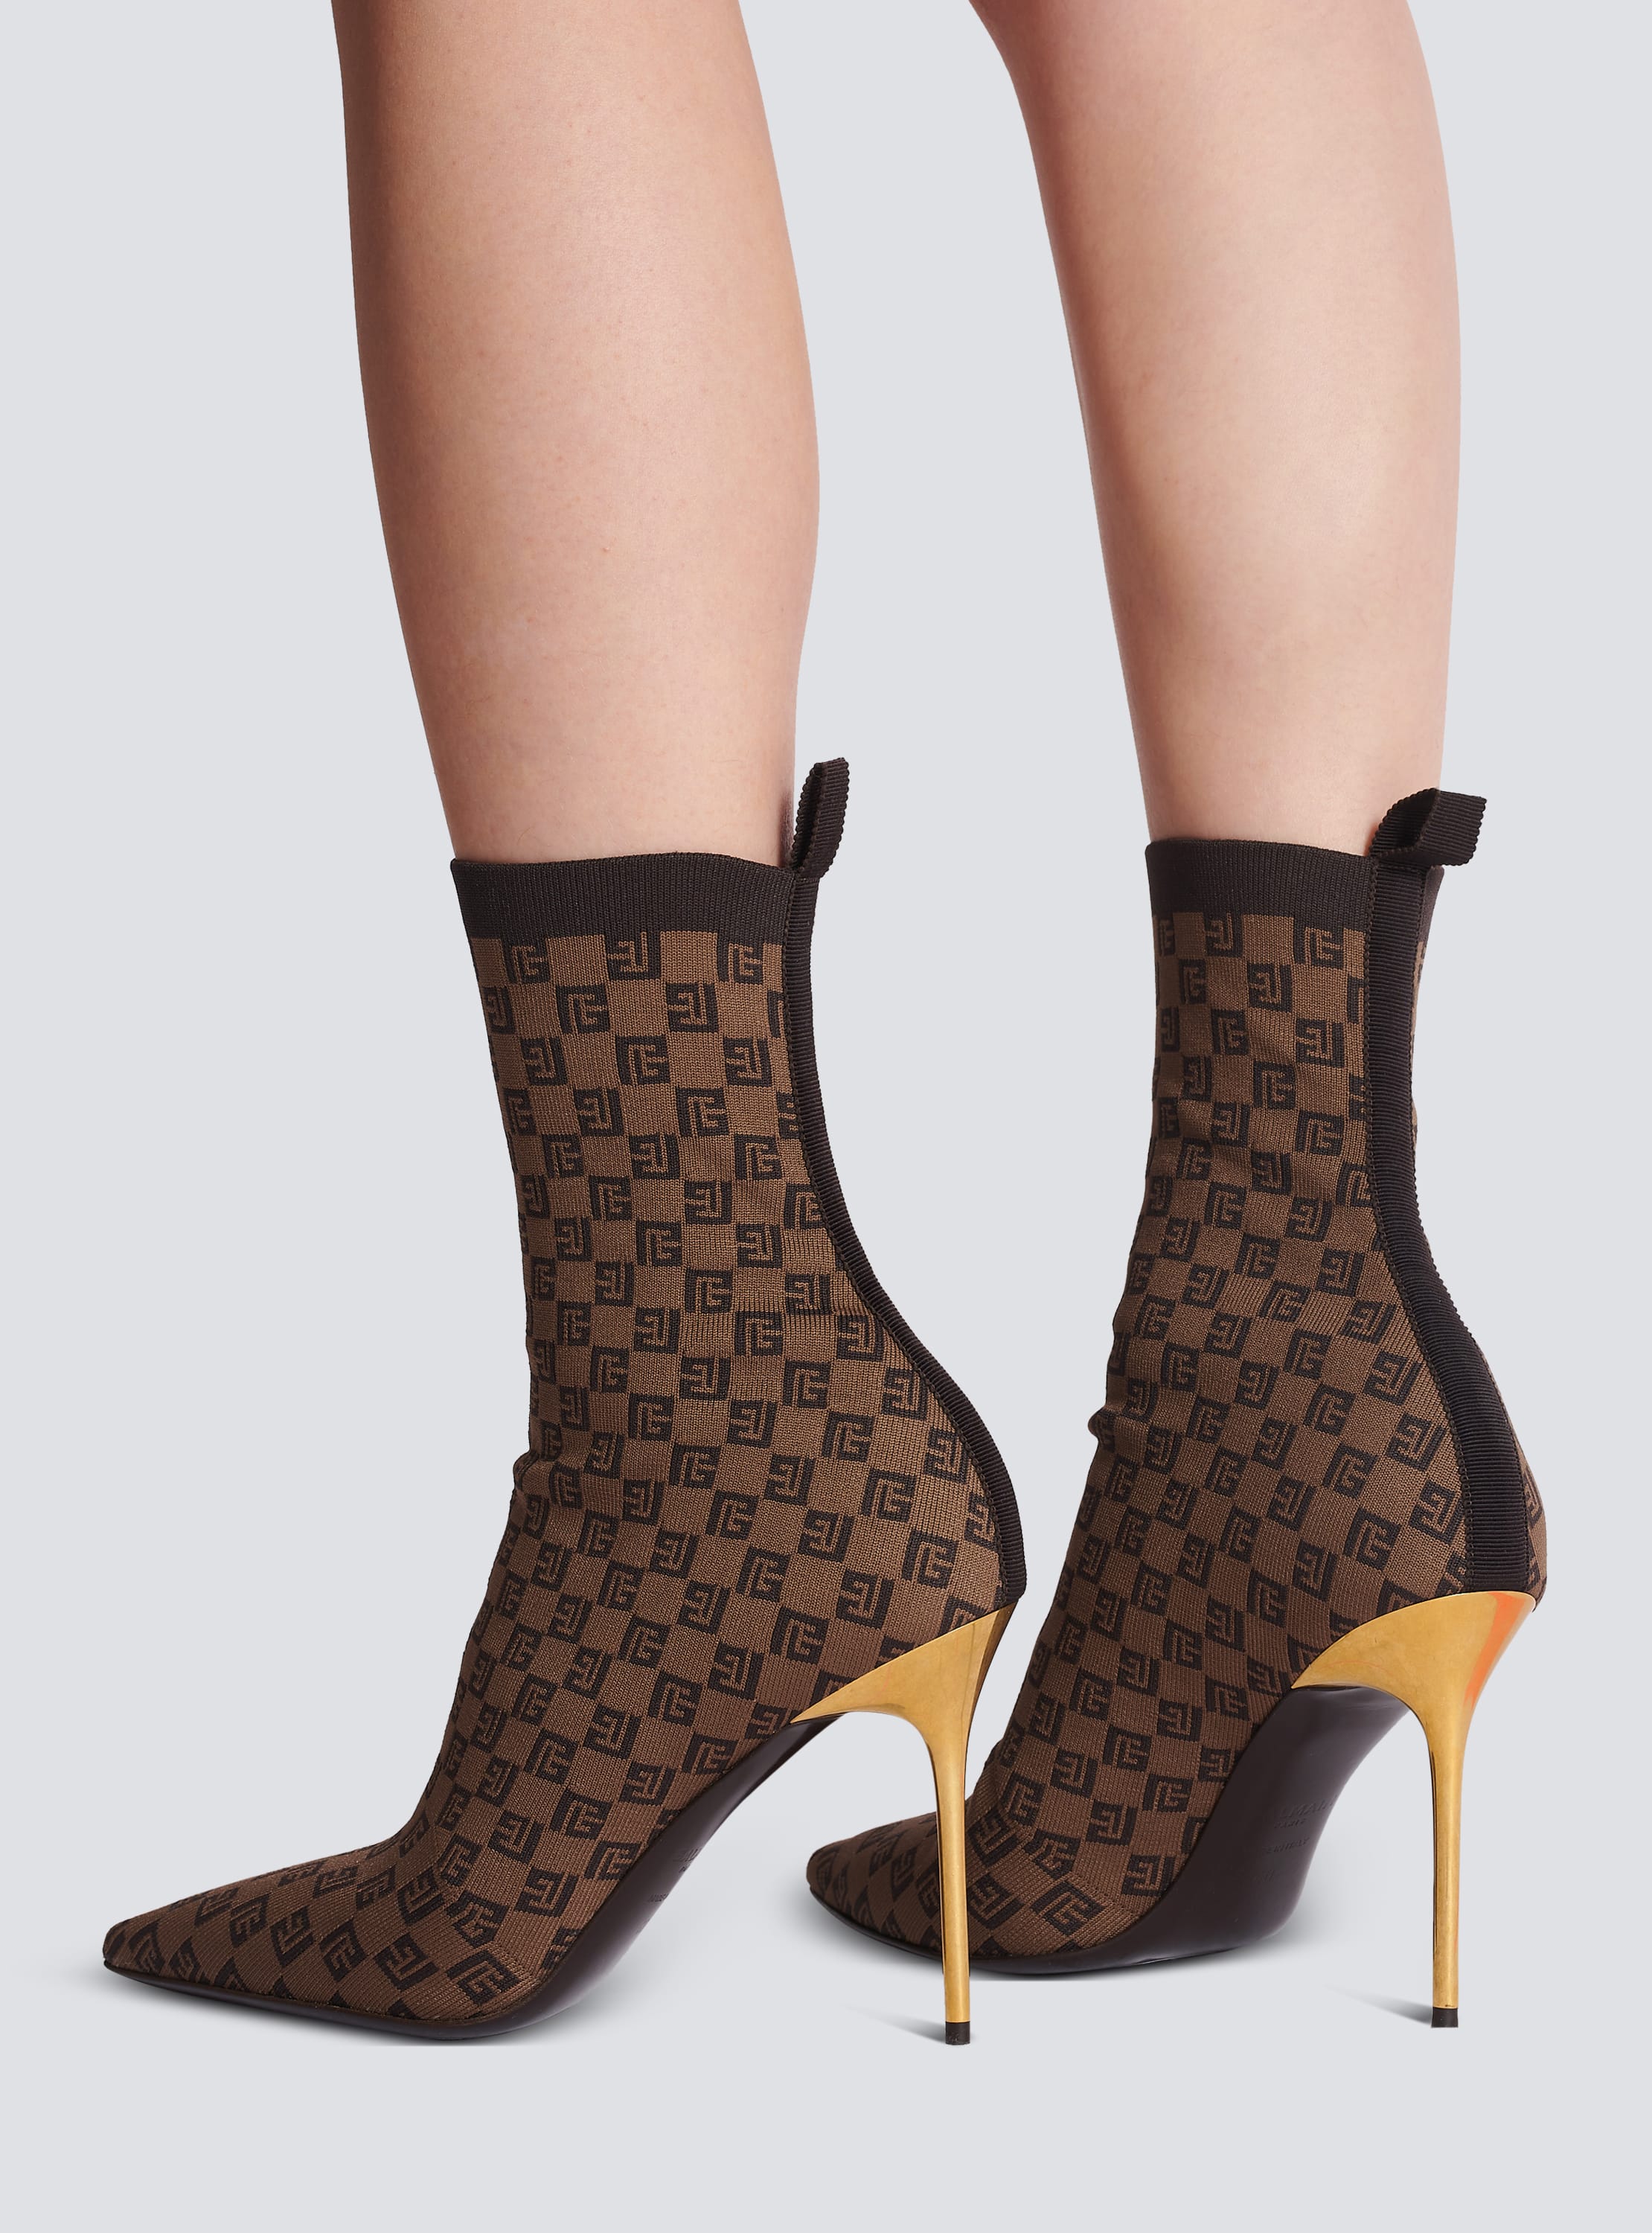 Louis Vuitton lv woman ankle sock boots high heels